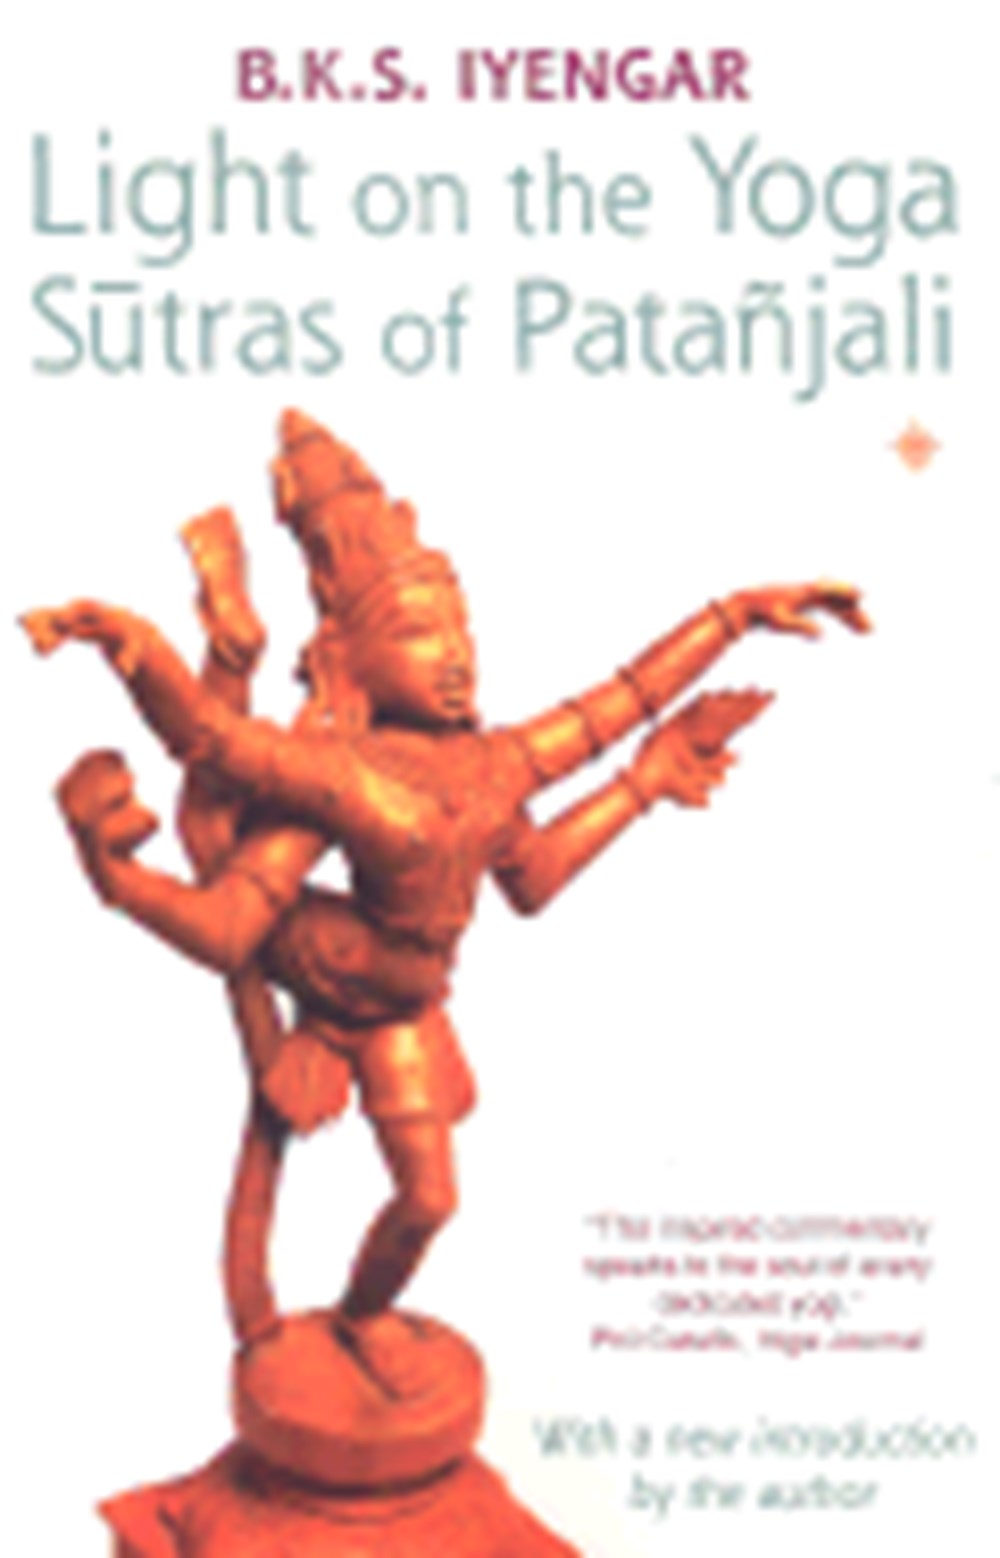 Light on the Yoga Sutras of Patanjali (Revised)